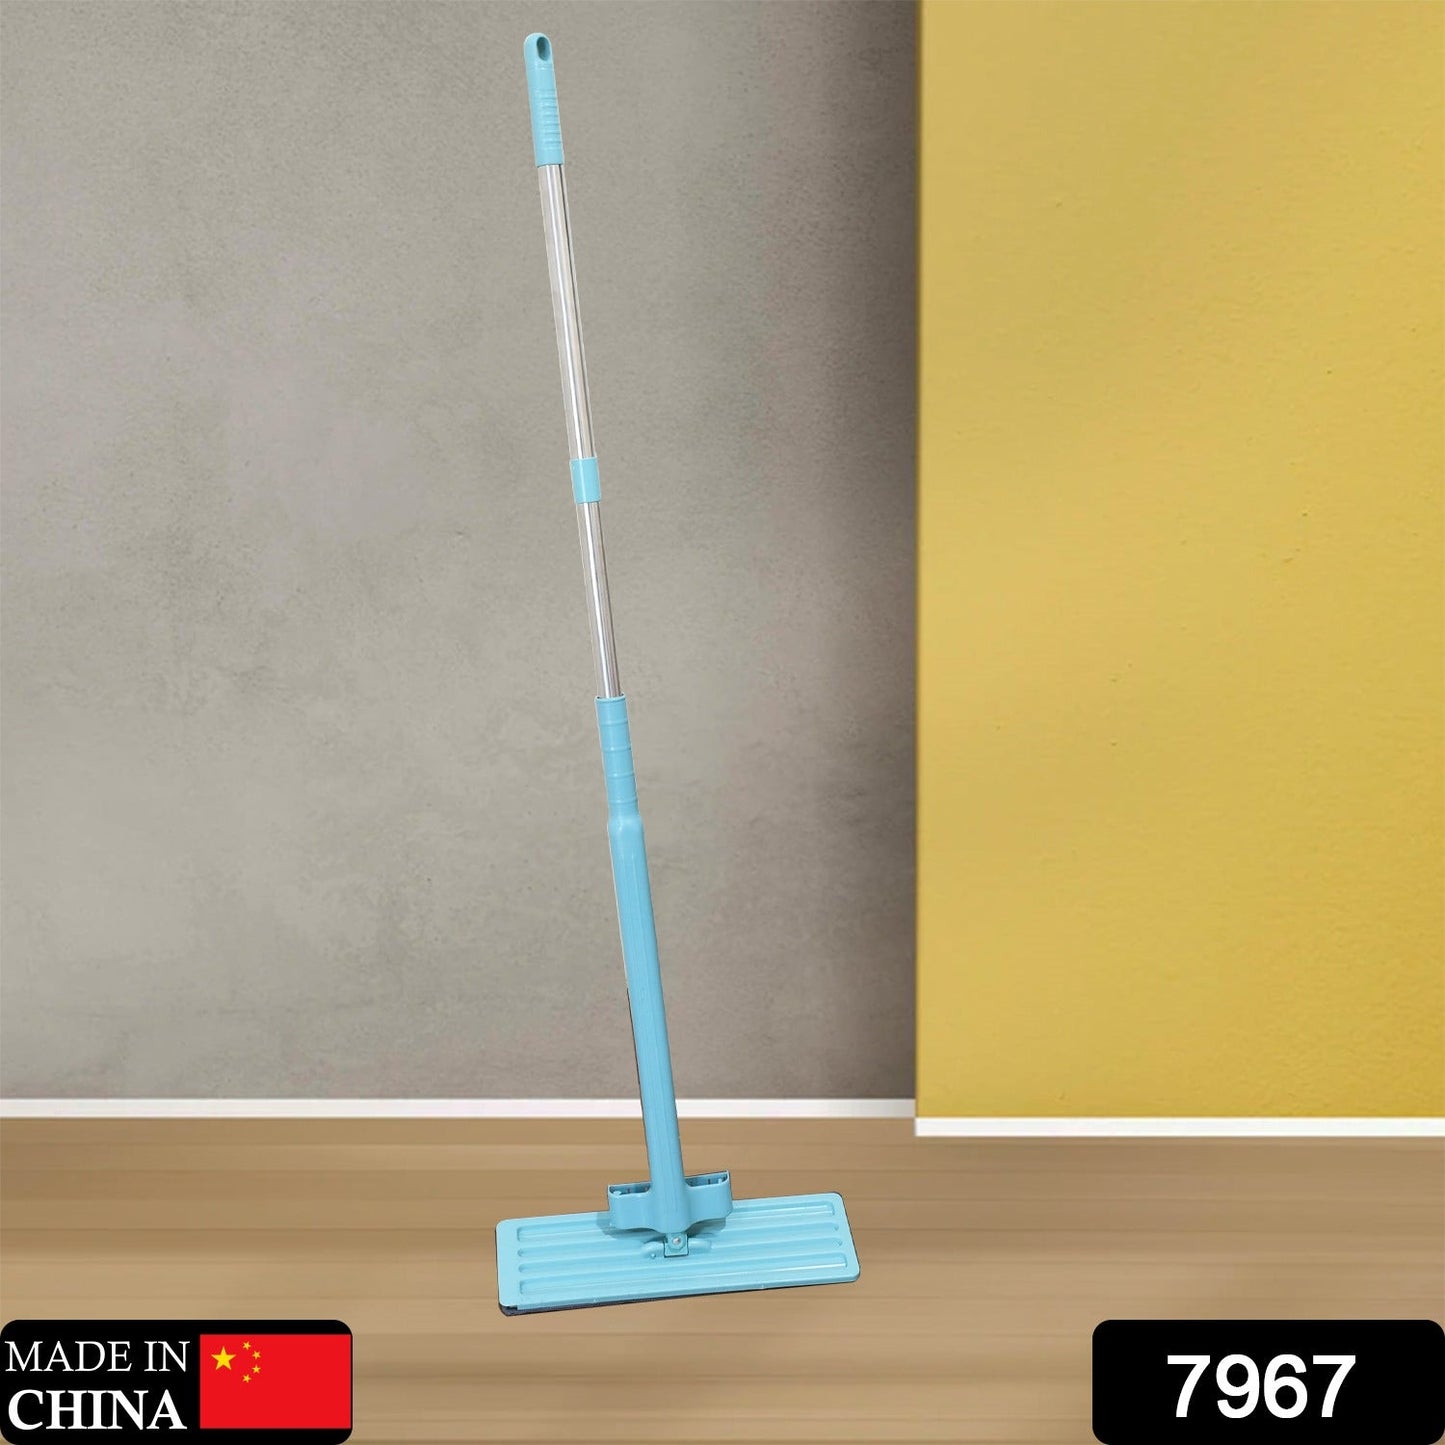 7967 High Quality Flat Mop Floor Cleaning Mop 360° Rotating Microfiber Dust Mop, Hardwood Floor Mop, Dust Flat Mop, for Home/ Office Floor Cleaning Reusable Dust Mops